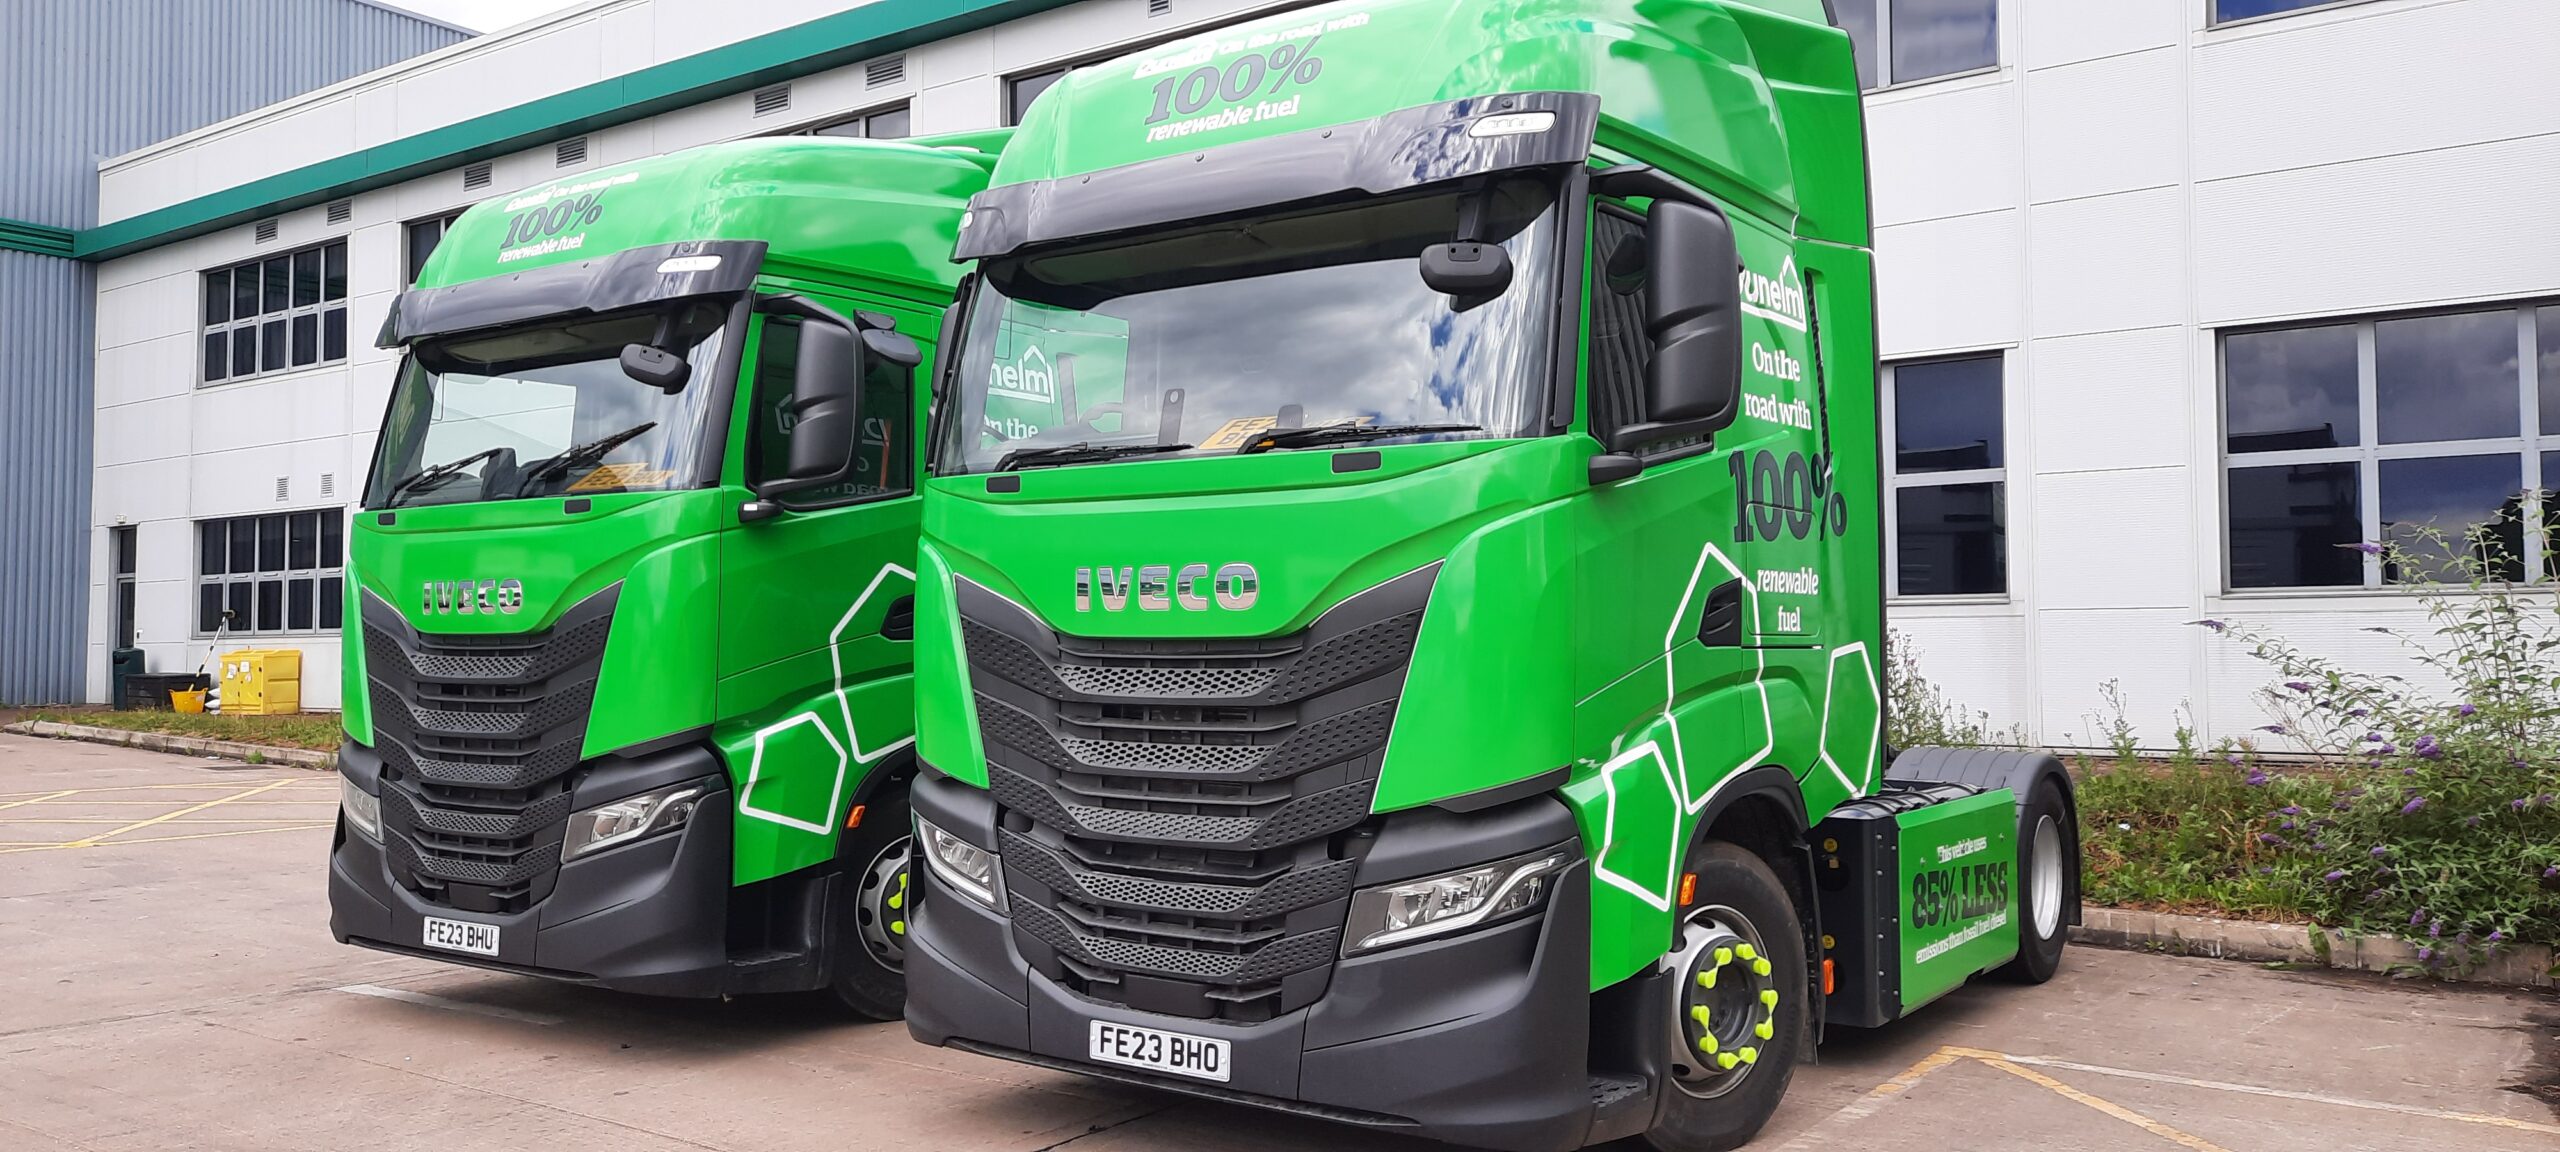 Scania's new biogas engines deliver 5% fuel savings for greener